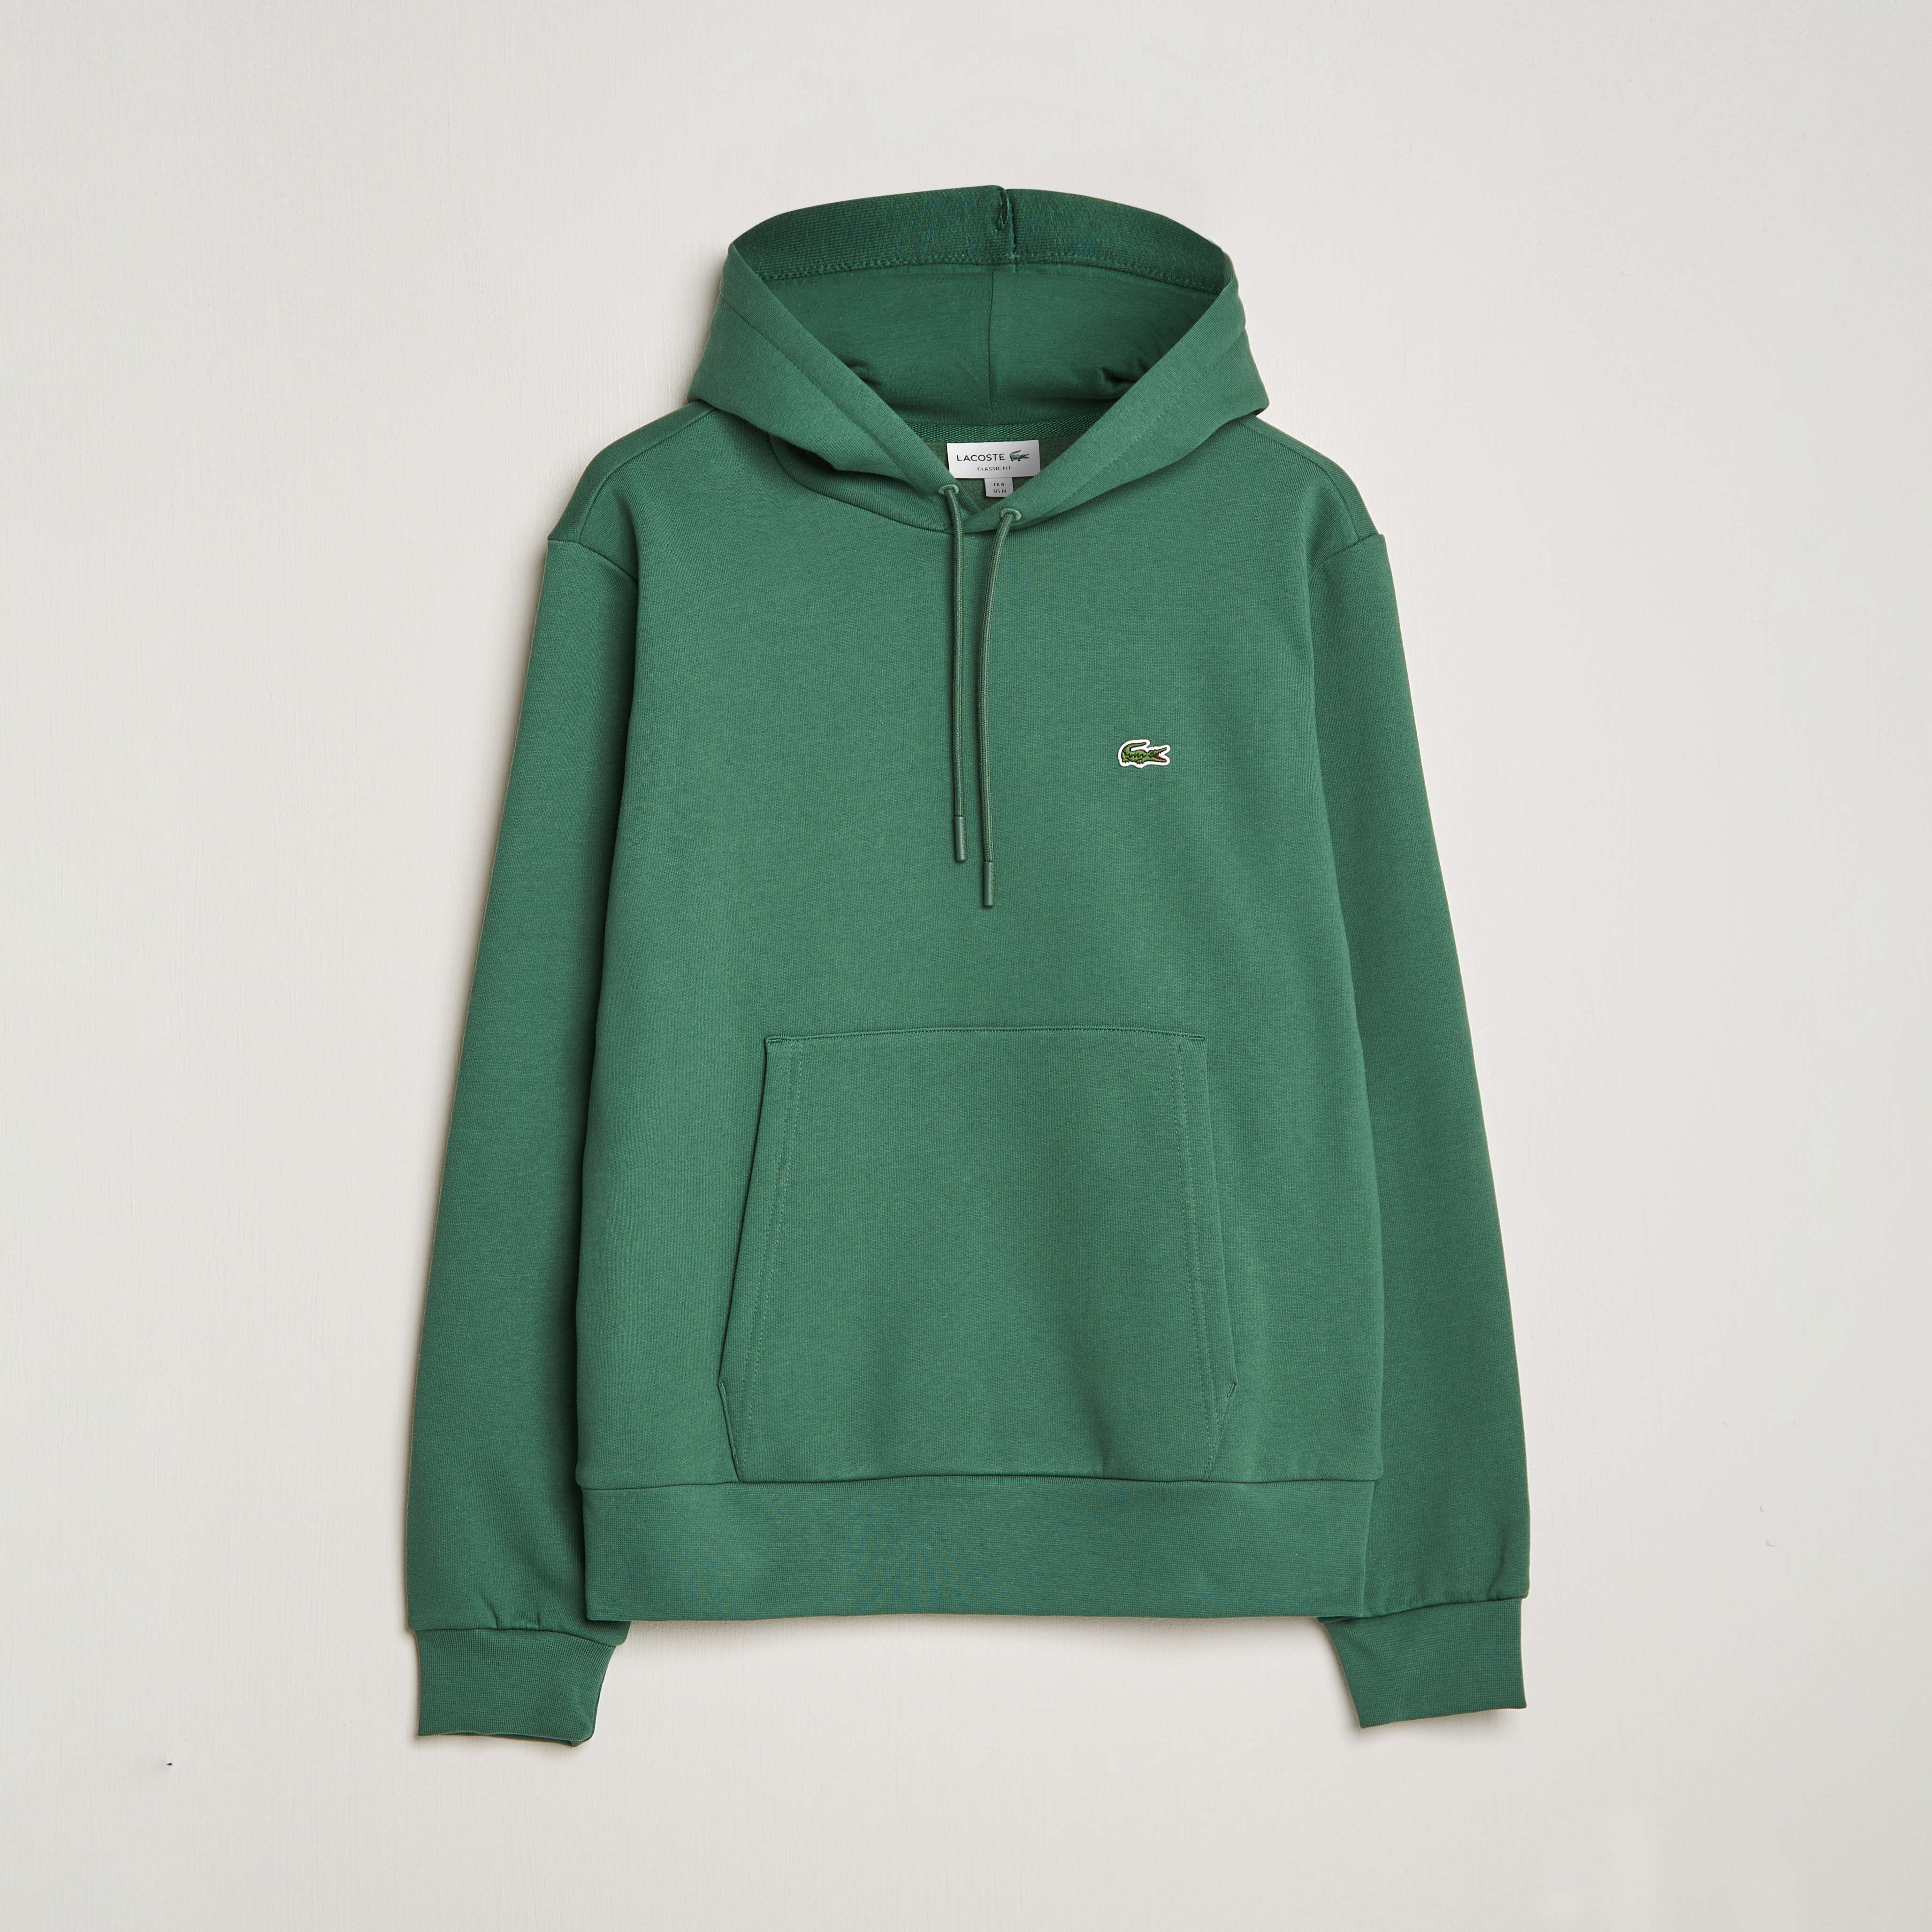 Hoodie at Sequoia Lacoste